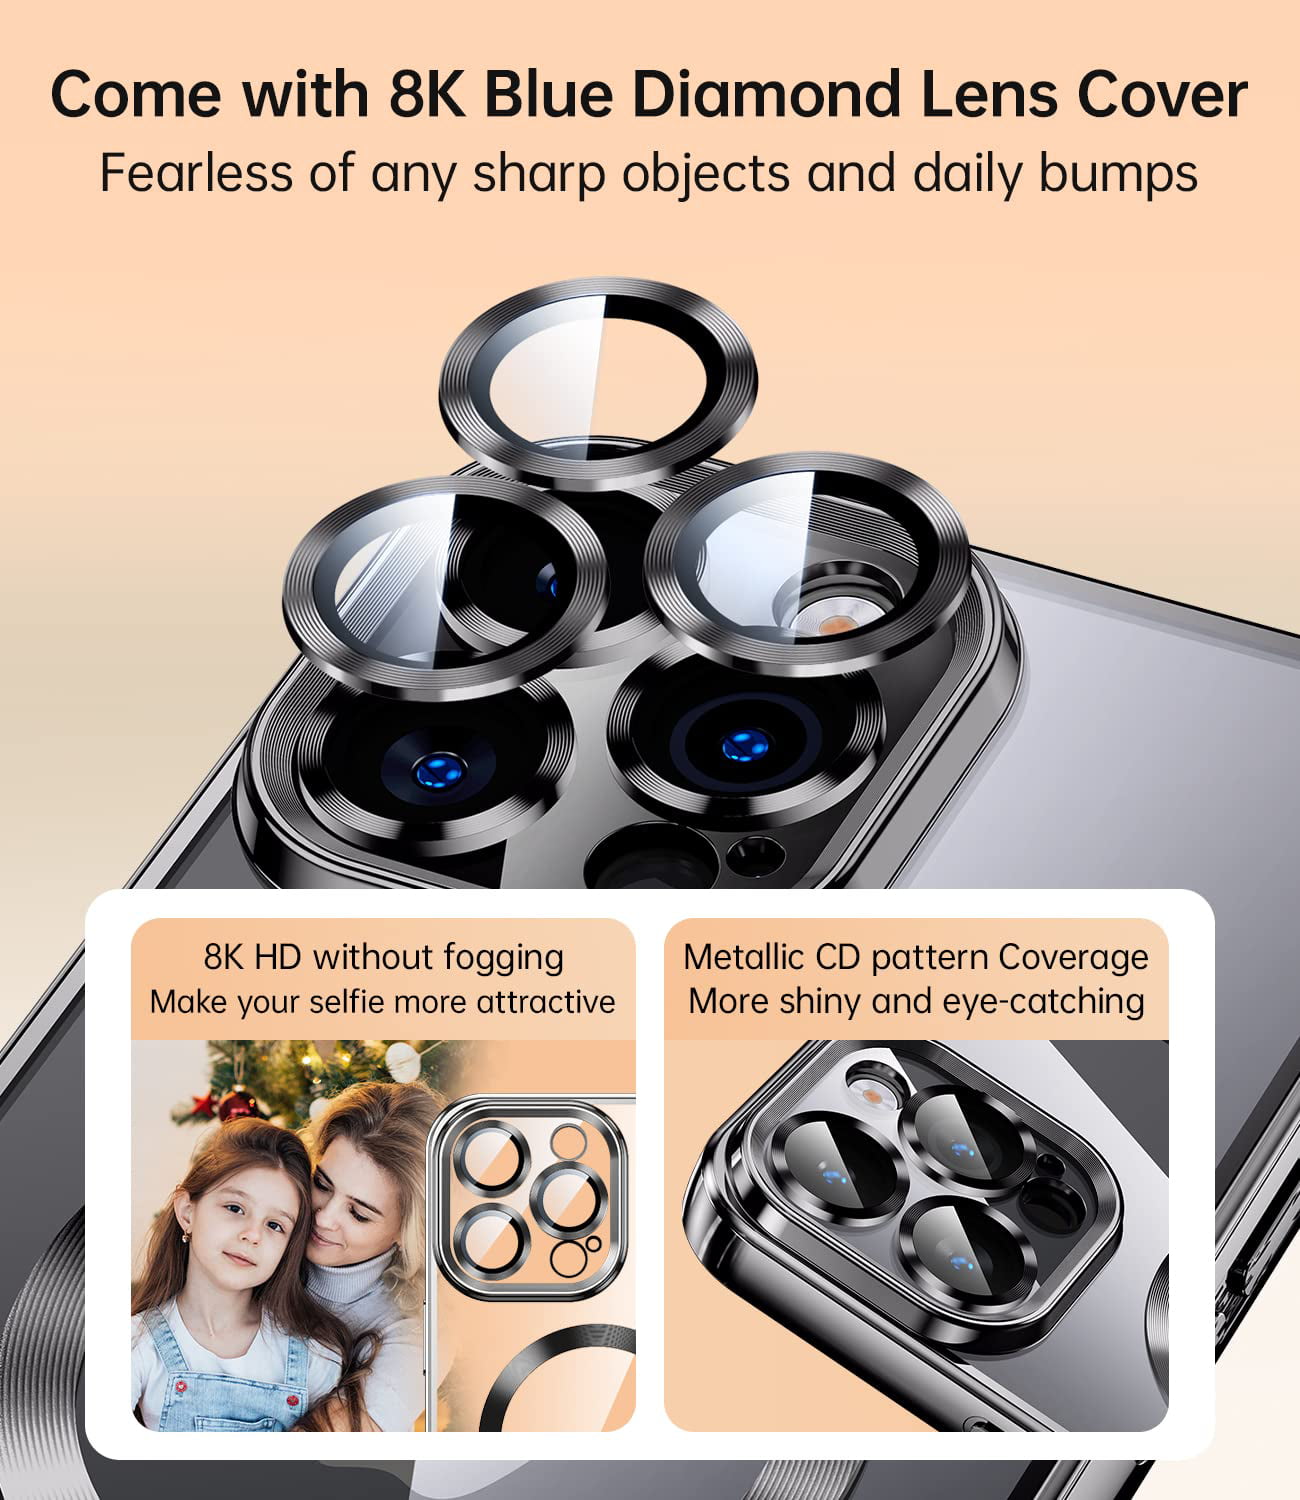 X-LEVEL Magnetic Plated Clear Case with Camera Protective for iPhone 14 Pro  / 14 Pro Max - GadStyle BD